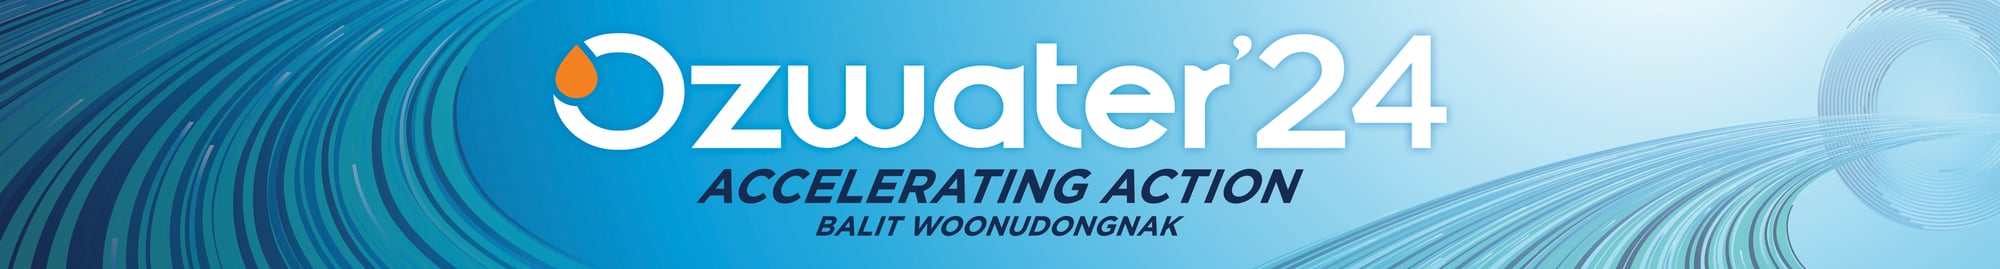 web banners_generic ozwater242